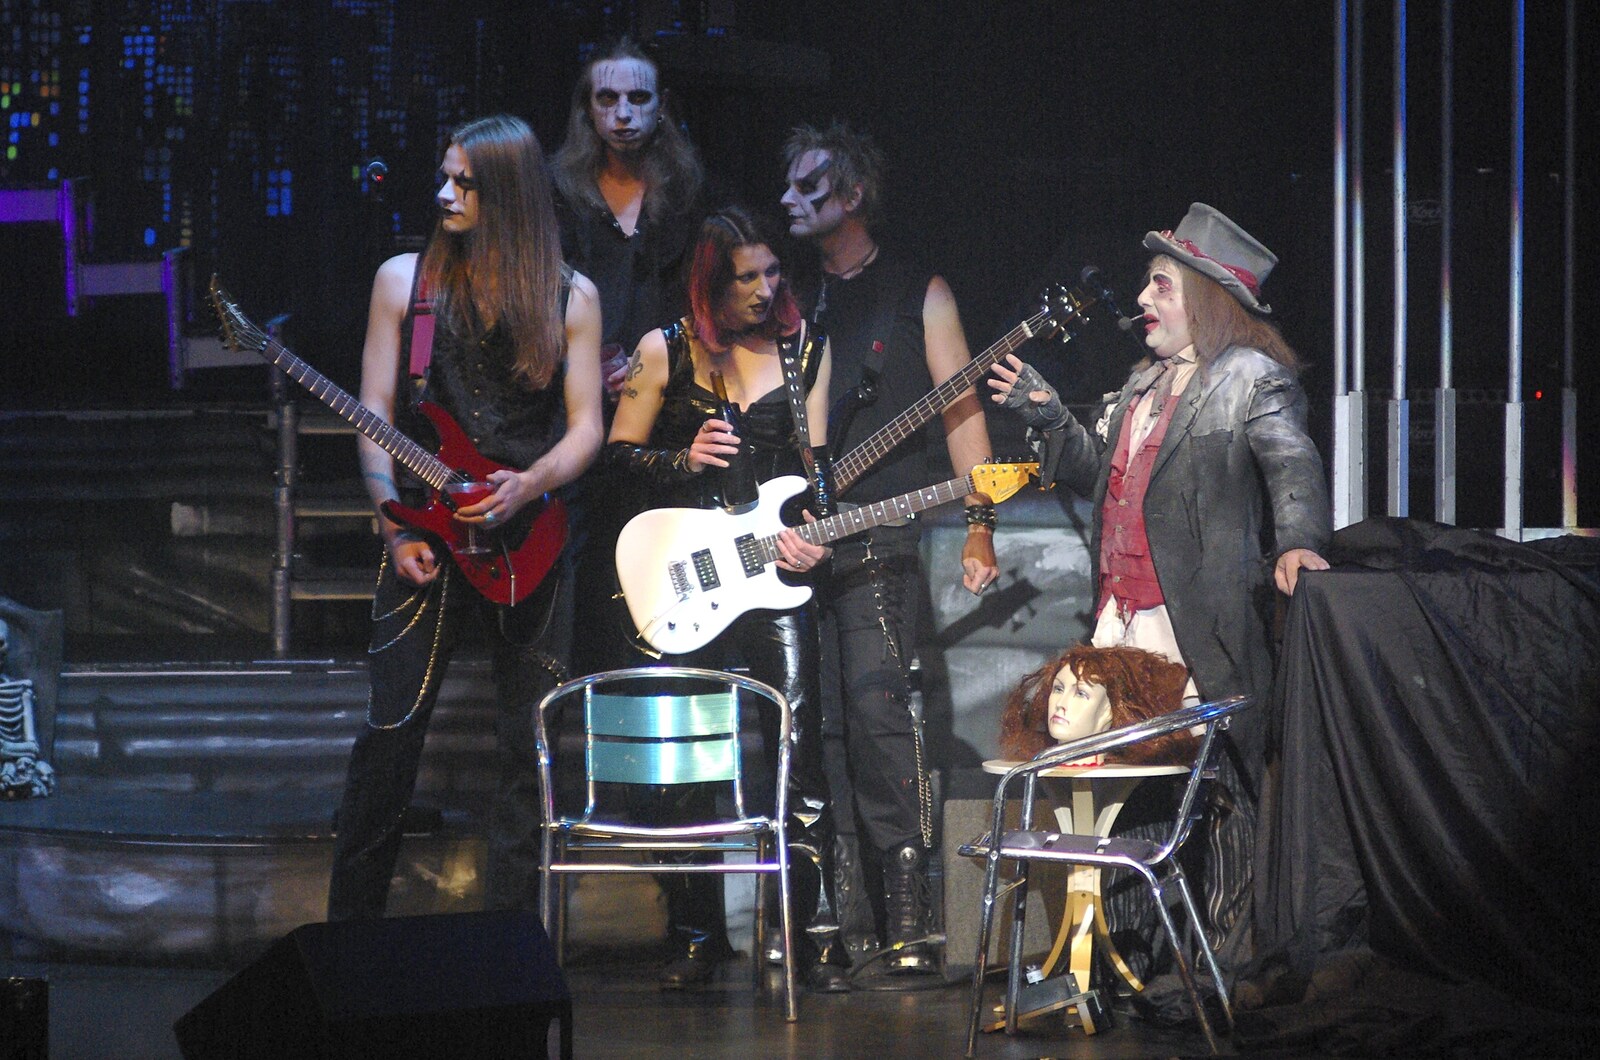 Mary and Stringfellow from Hell Mary and Vampires Rock, Broadway Theatre, Peterborough - 26th October 2007